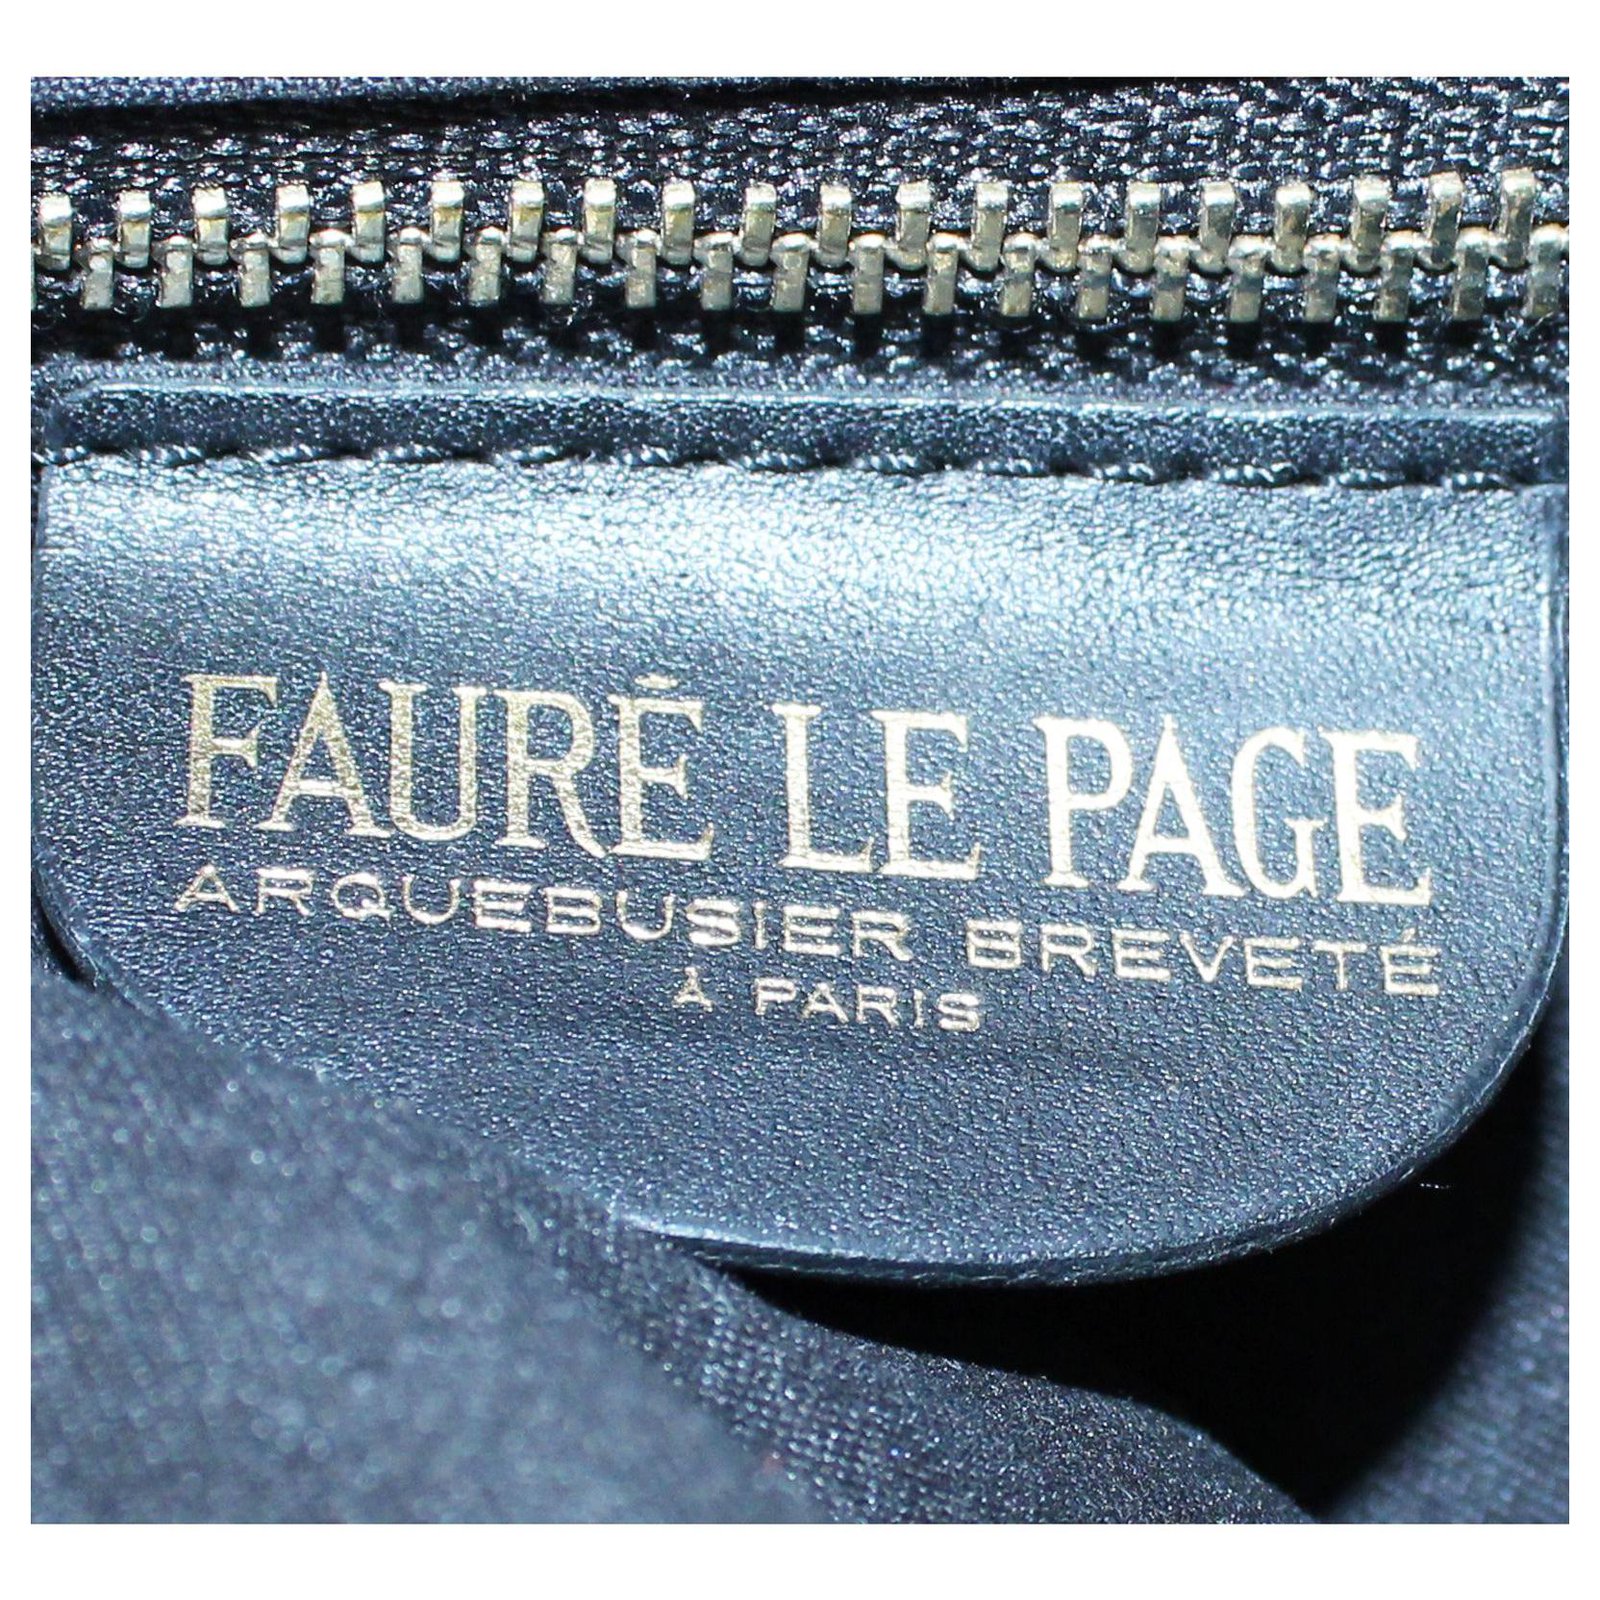 Faure Le Page Grey Toile Ecailles Carry on Tote Faure Le Page